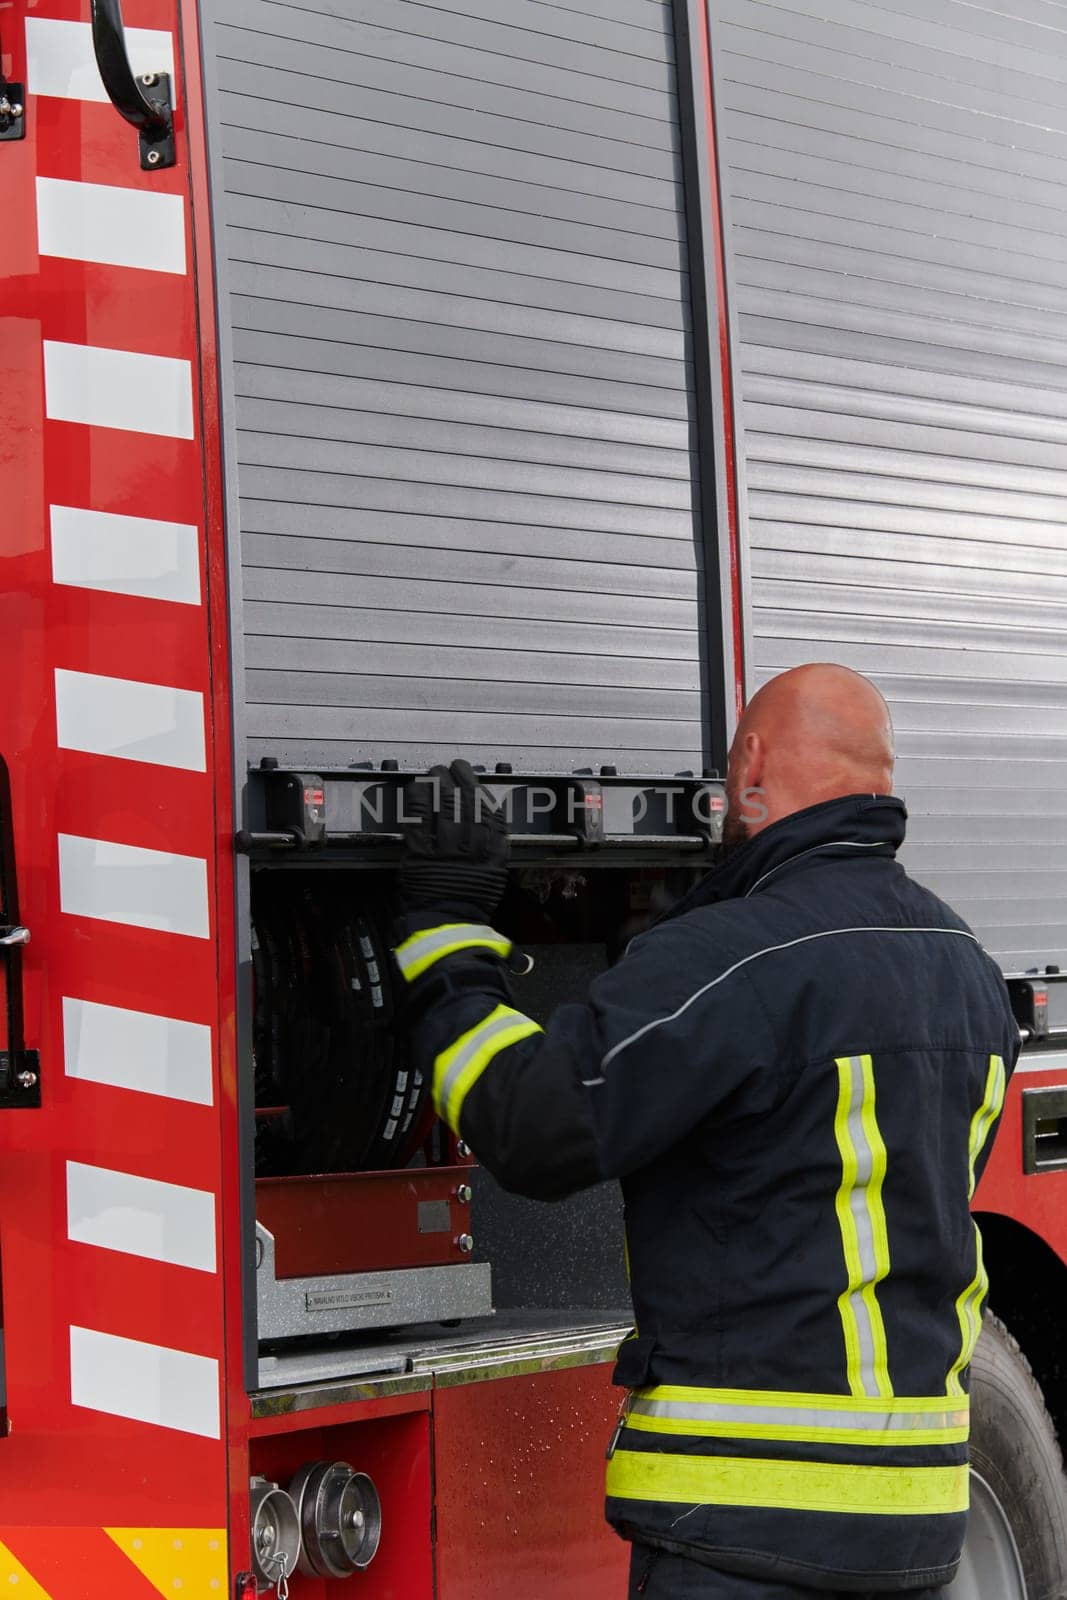 A firefighter meticulously prepares a modern firetruck for a mission to evacuate and respond to dangerous situations, showcasing the utmost dedication to safety and readiness in the face of a fire emergency.